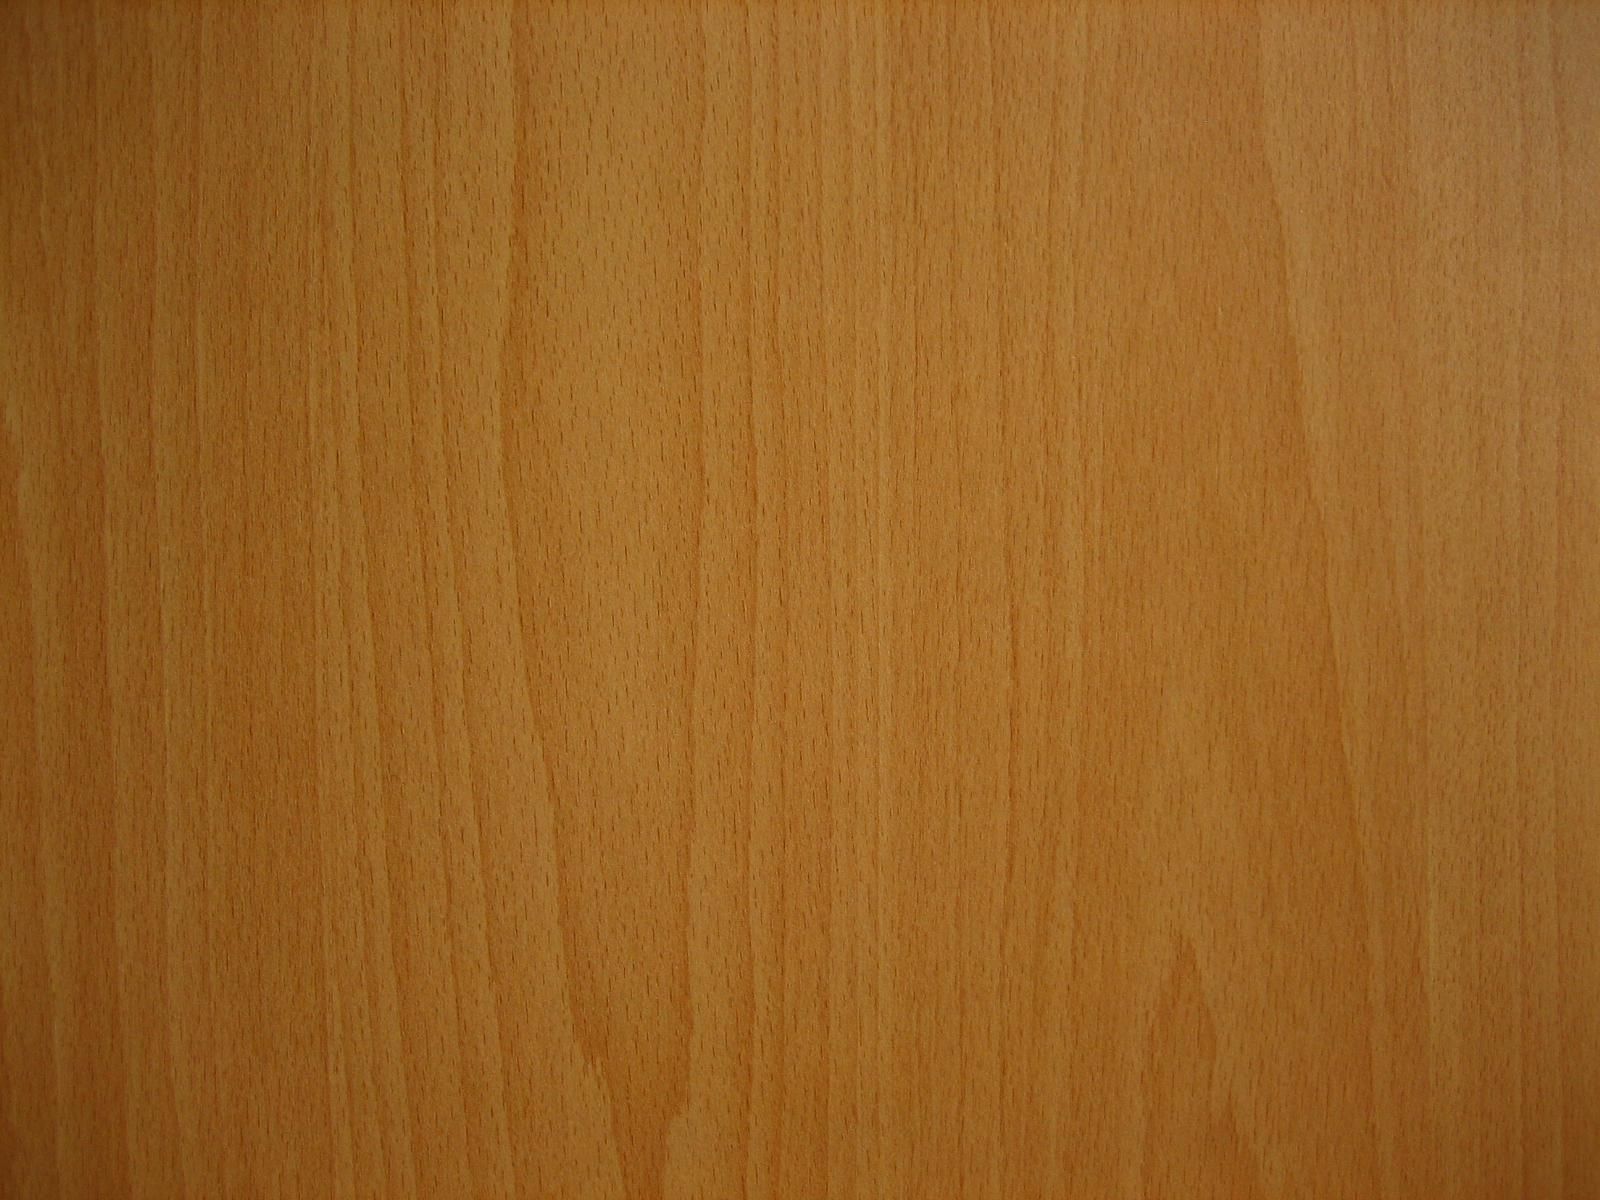 Brown wooden surface photo